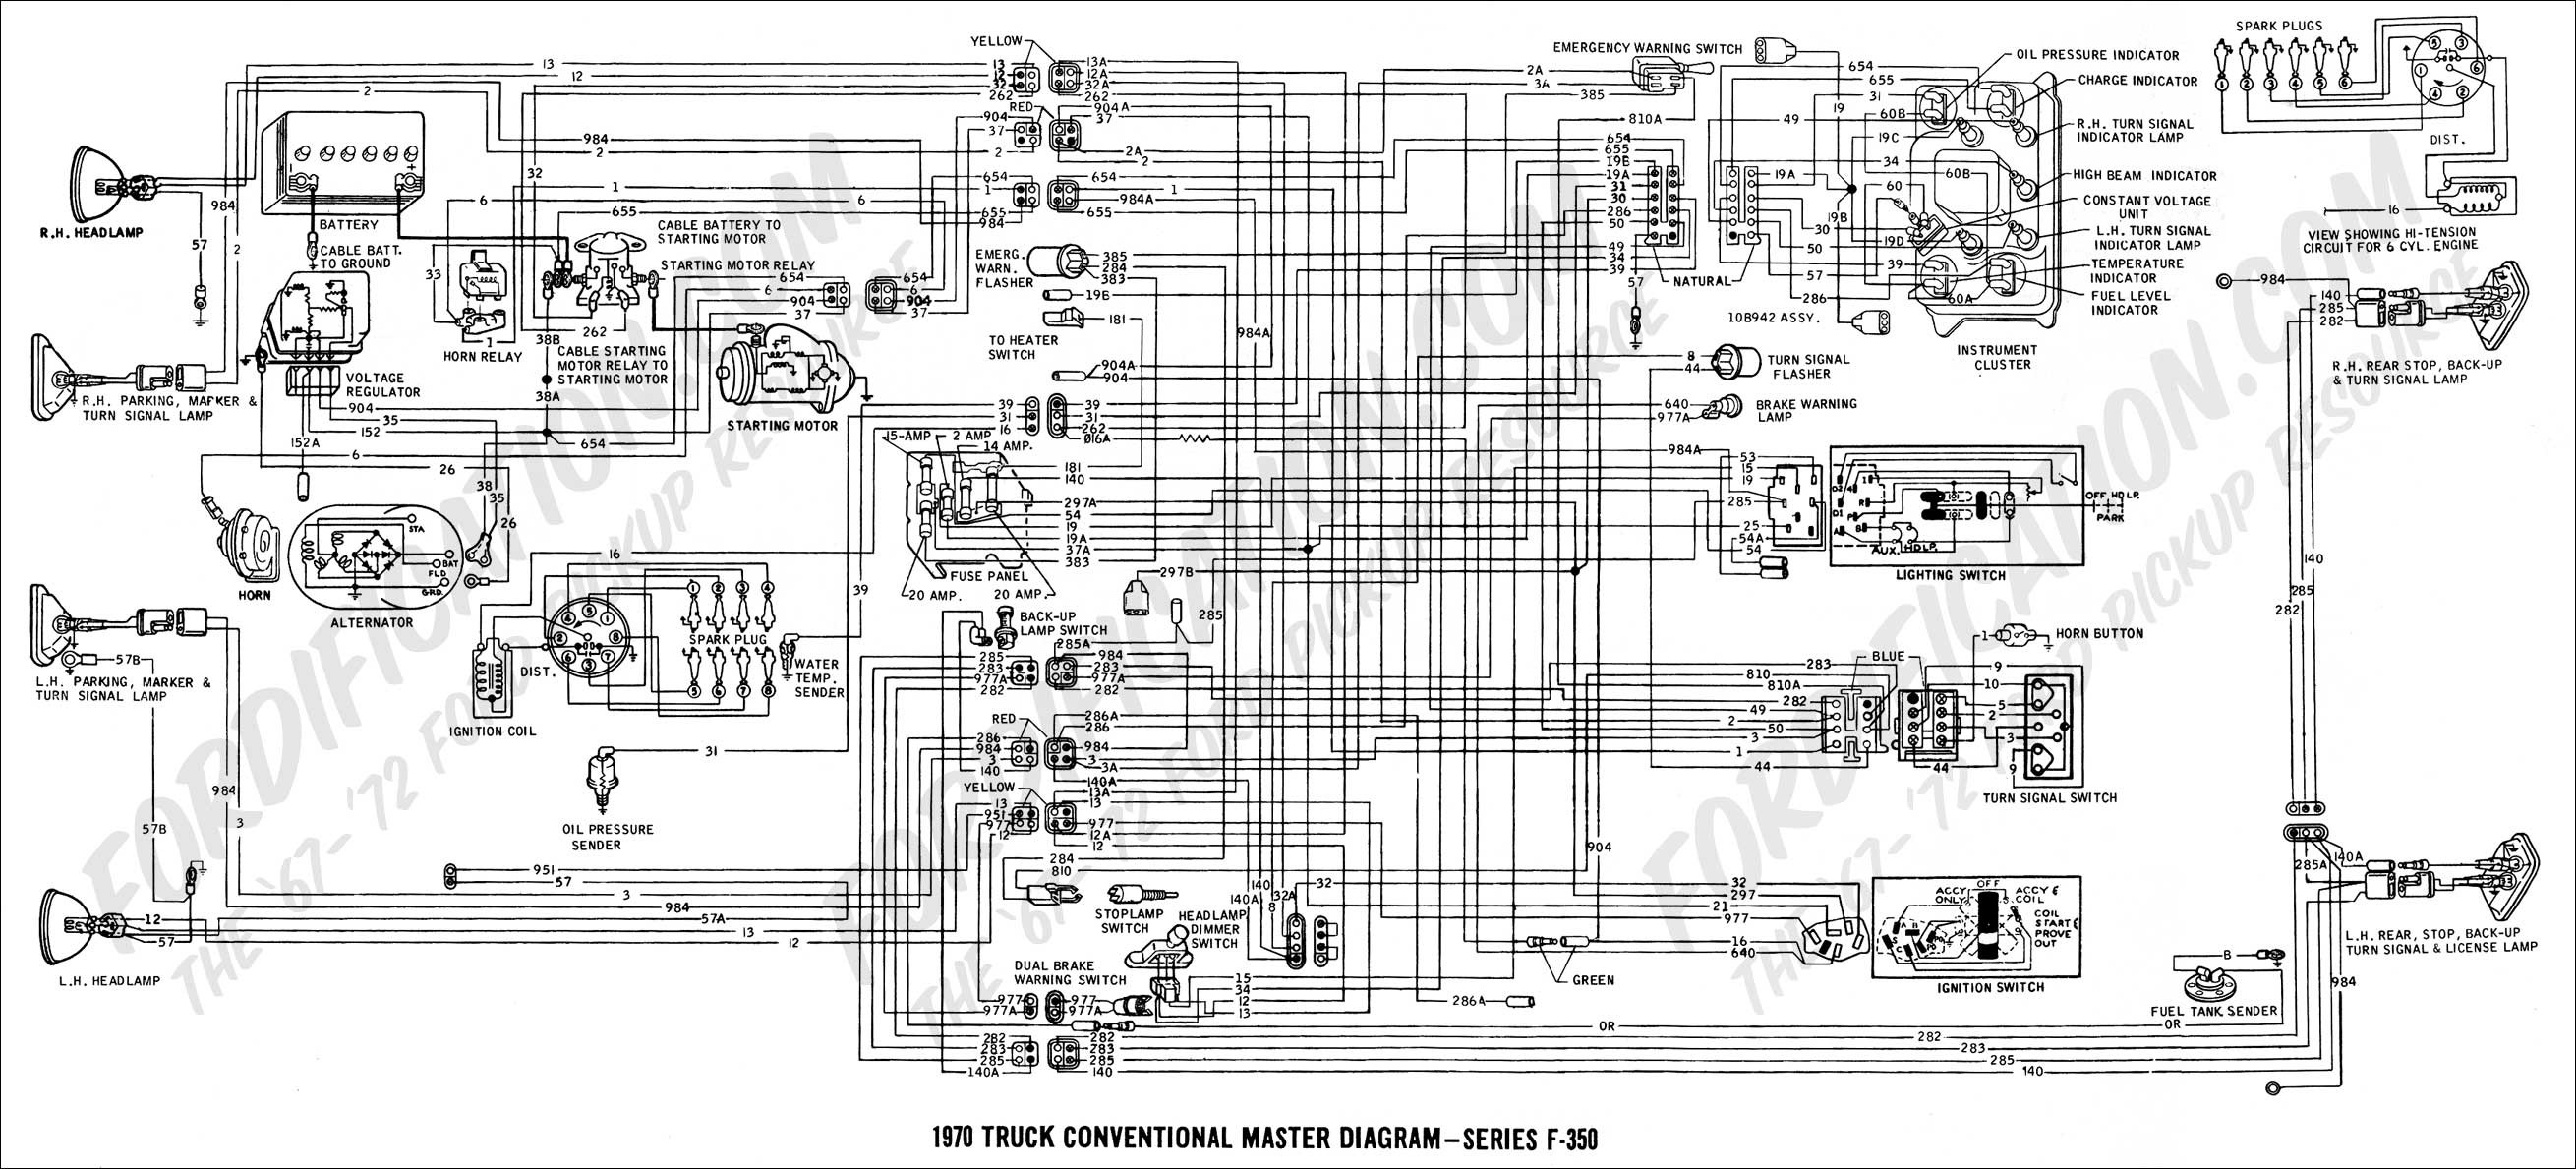 2004 ford F150 Engine Diagram Diagram as Well ford F 350 Wiring Diagram In Addition ford Headlight